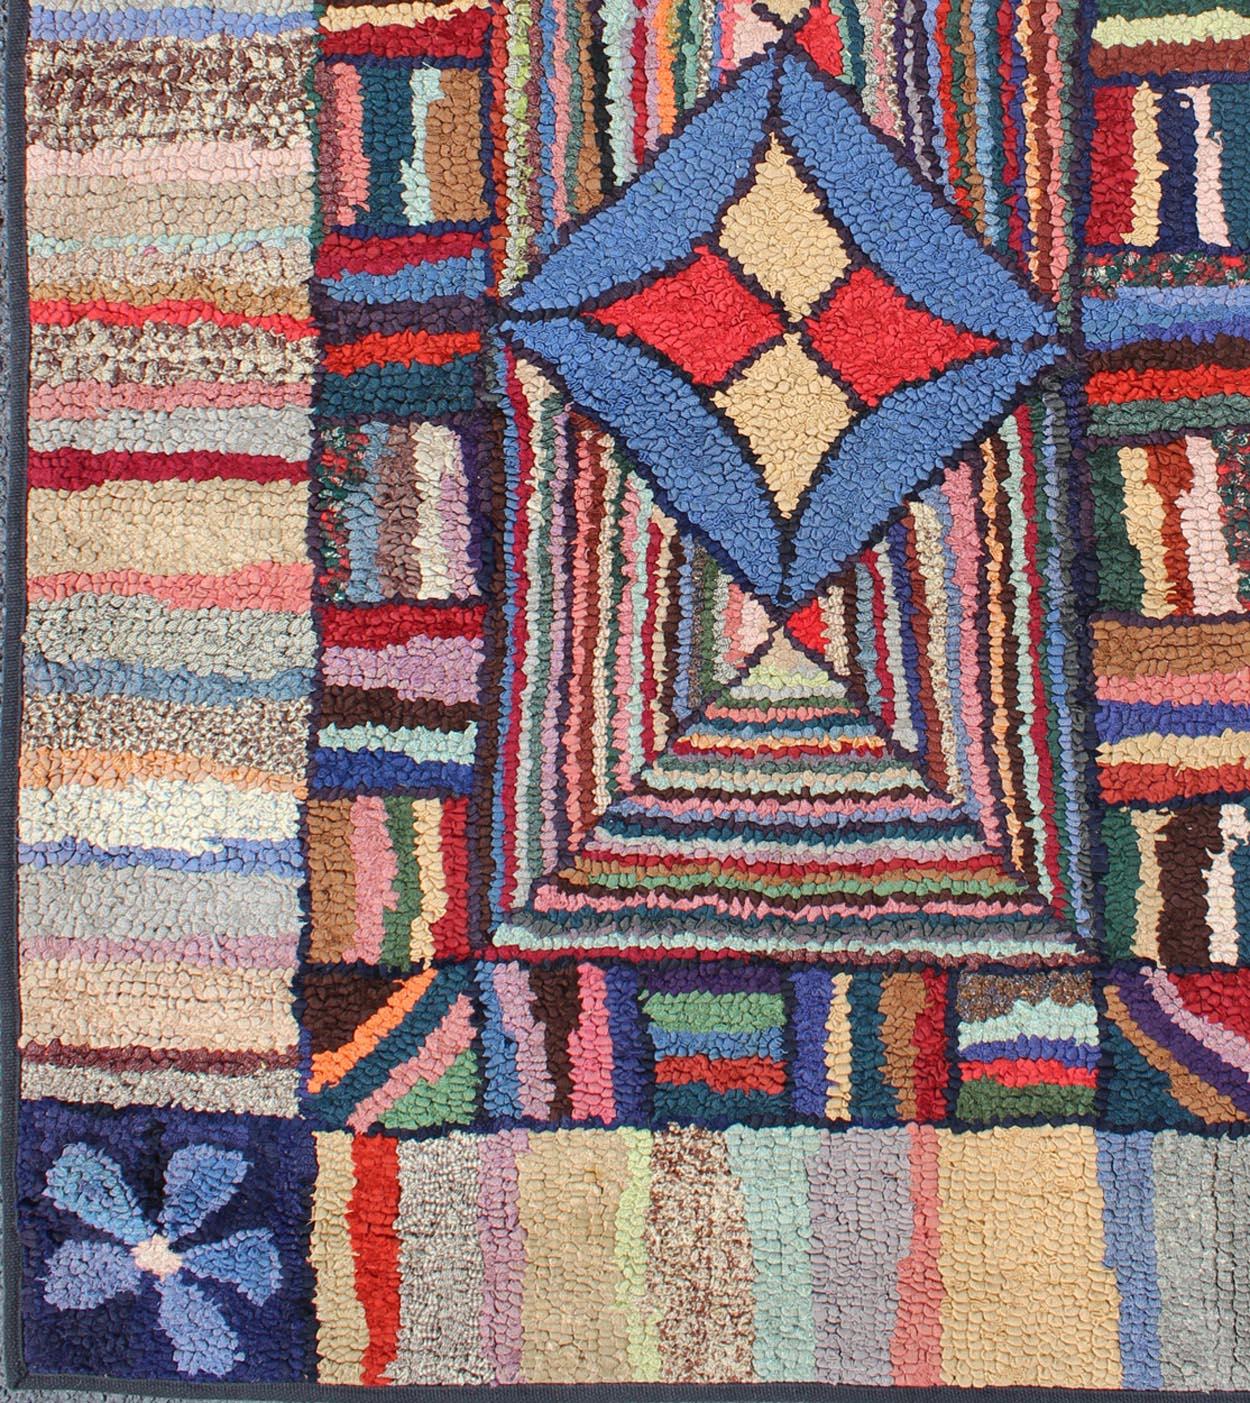 American Colonial Antique American Hooked Rug with Colorful Geometric Design with Striped Border